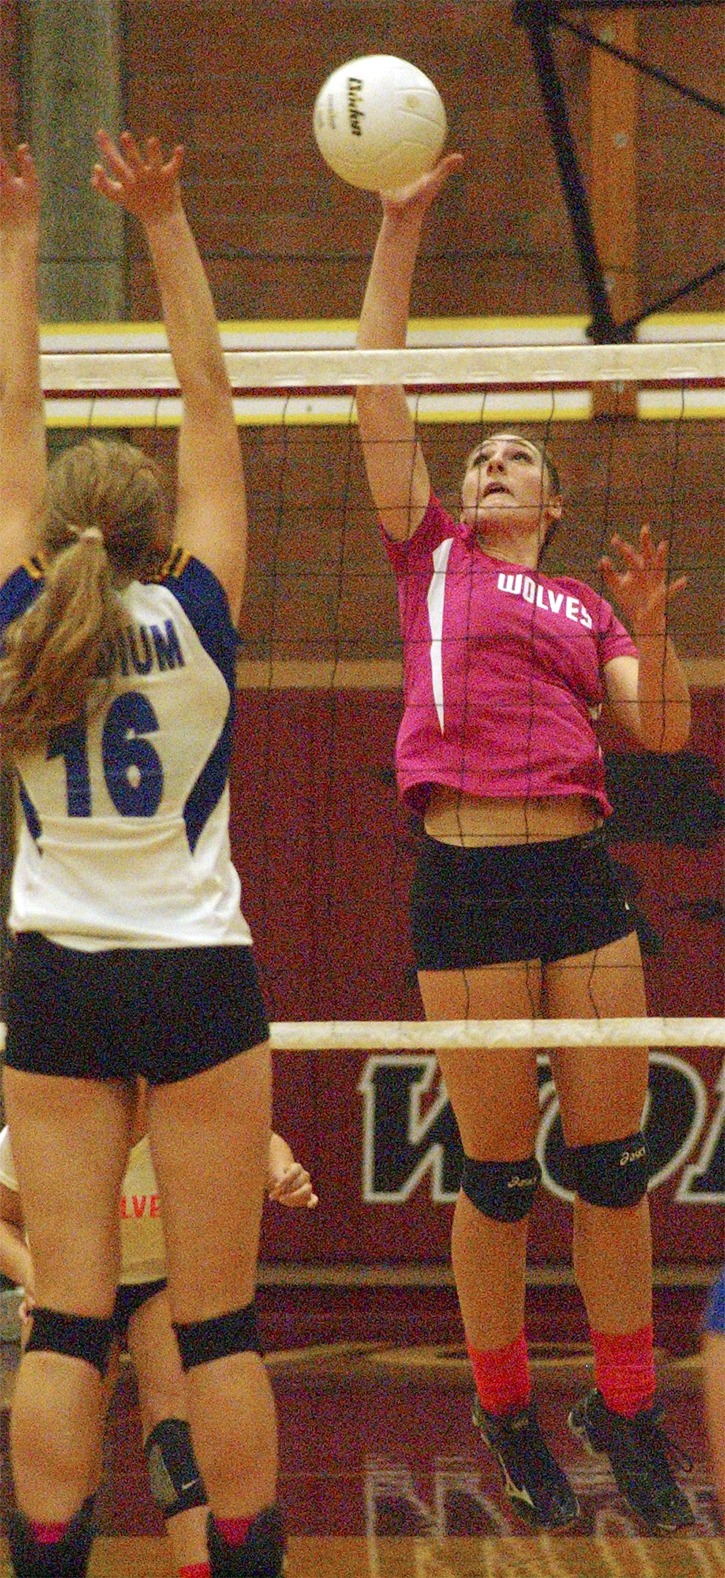 South Kitsap senior middle blocker Courtney Schmidt believes the Wolves can build on their first district playoff appearance since 2008 this year.